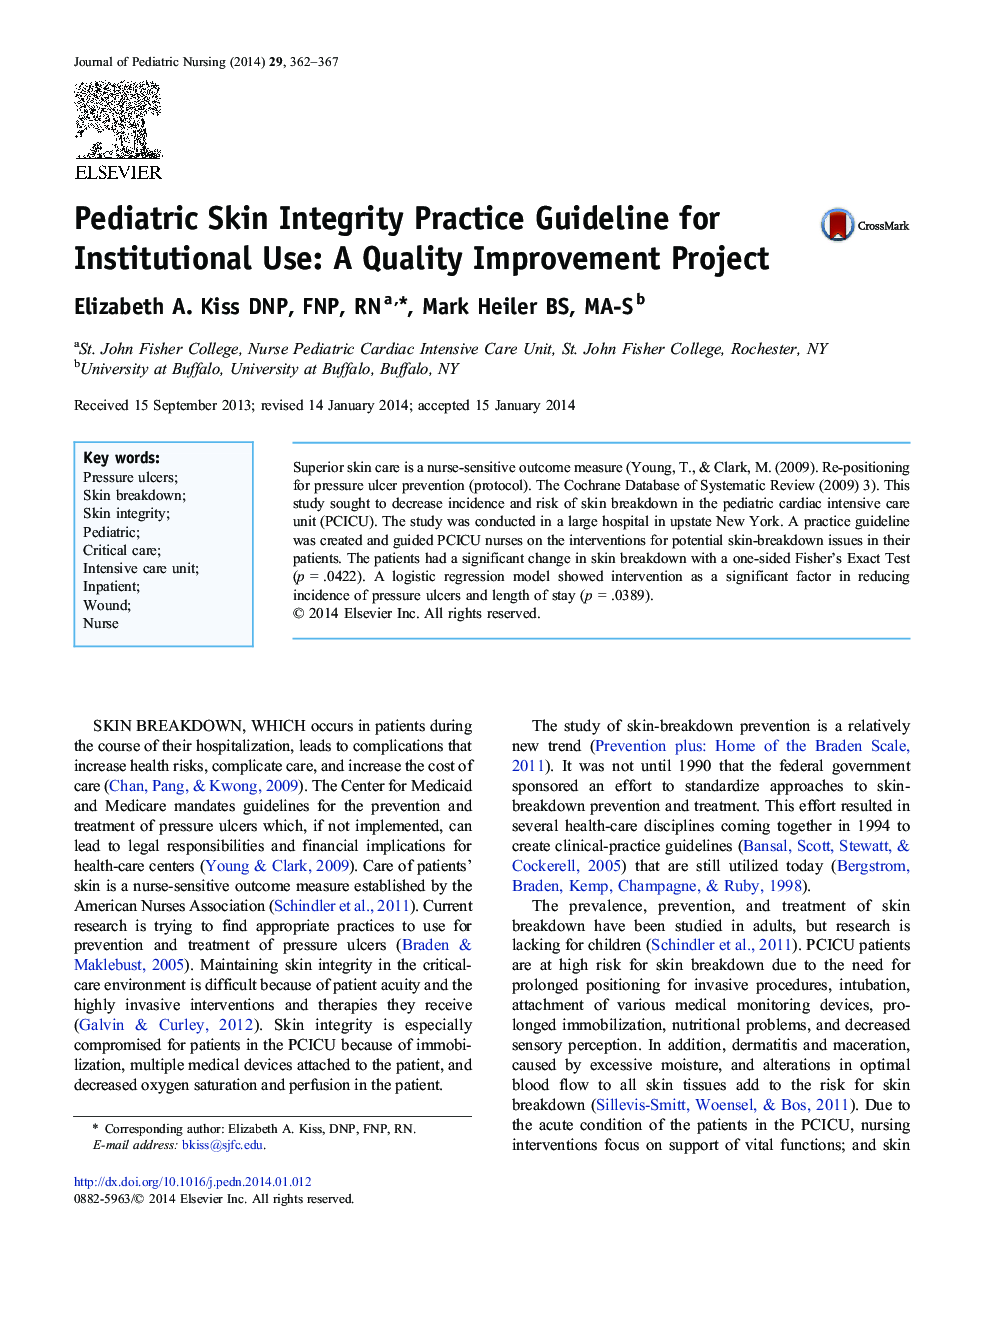 Pediatric Skin Integrity Practice Guideline for Institutional Use: A Quality Improvement Project